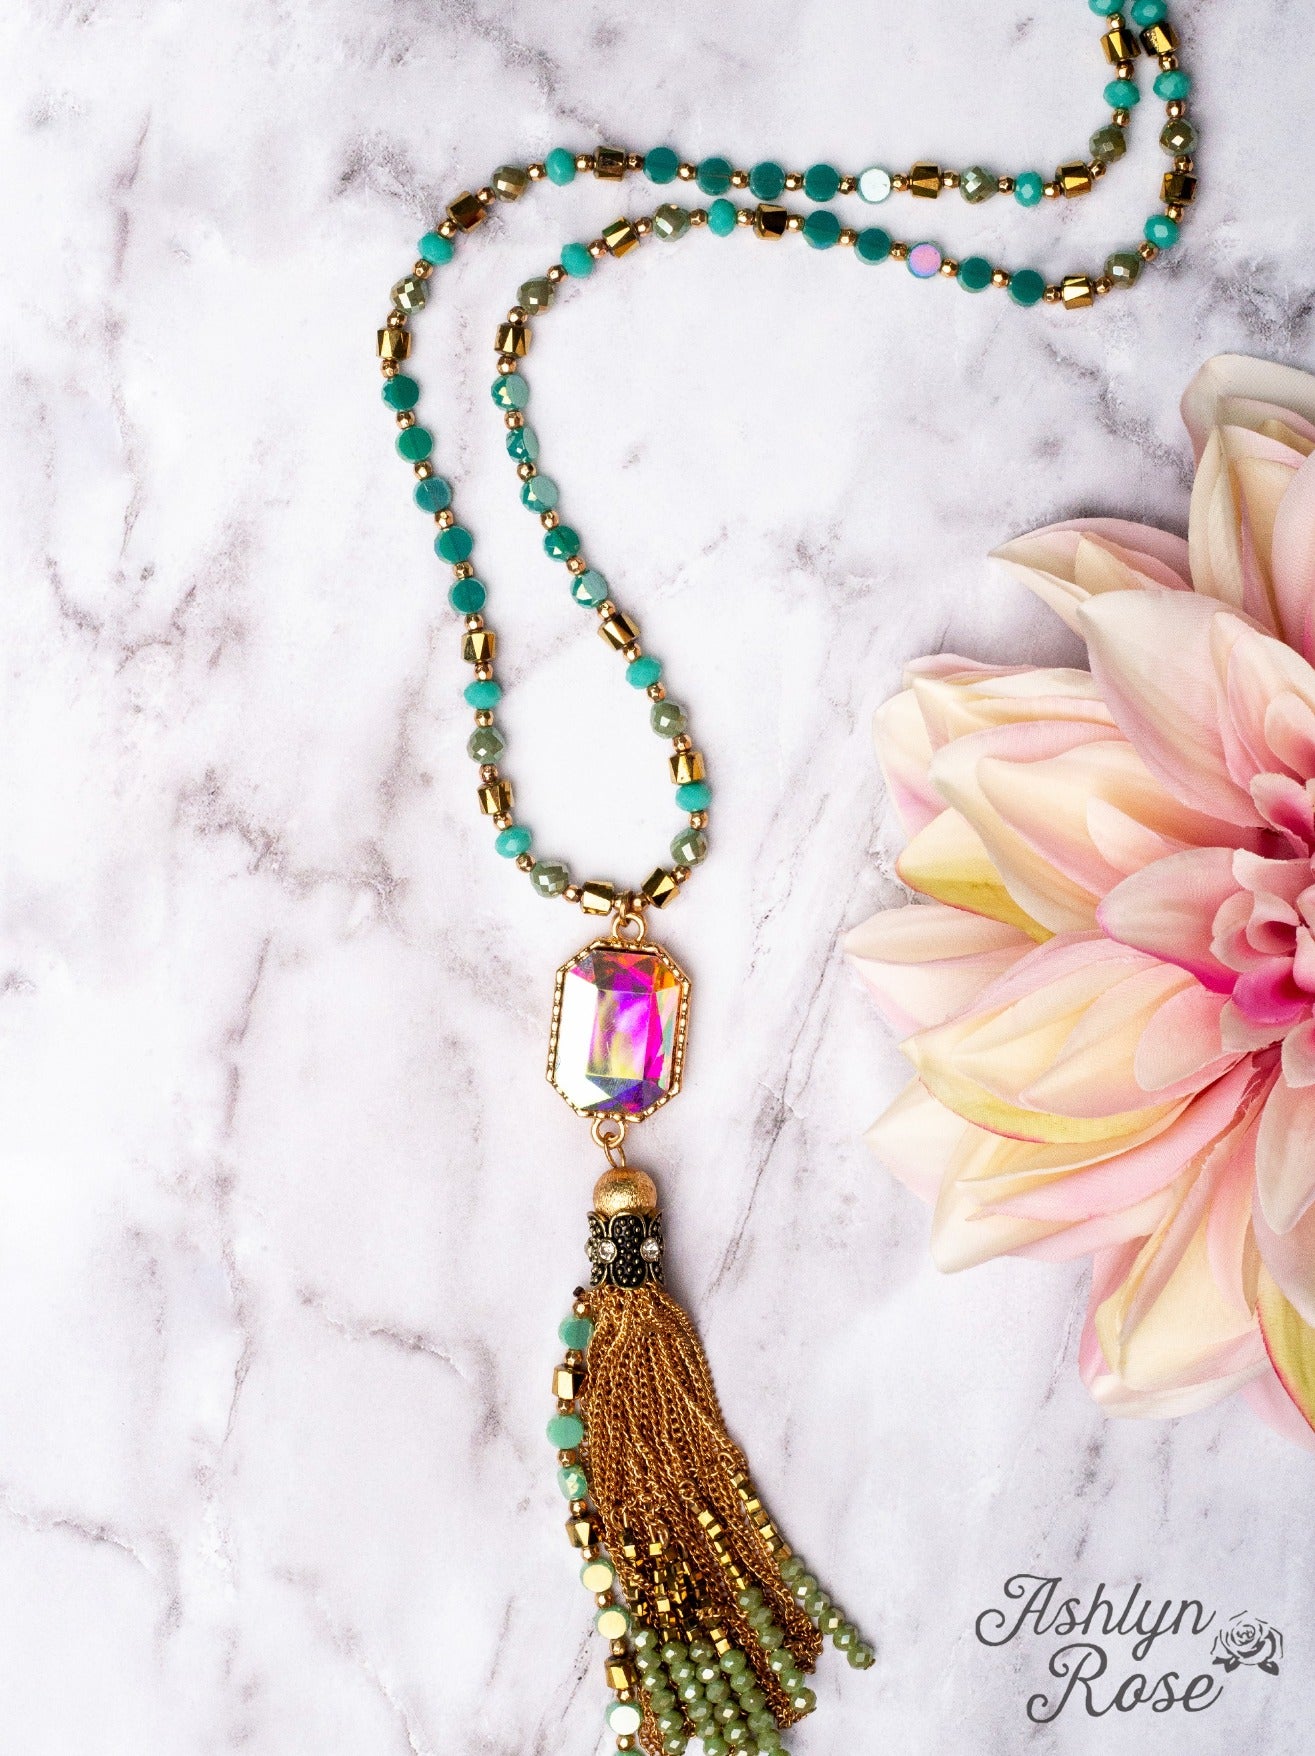 WATCH THE SUNSET WITH ME IRIDESCENT PENDANT WITH GOLD CHAIN TASSELS ON A MIXED CRYSTAL BEADED NECKLACE, TURQUOISE